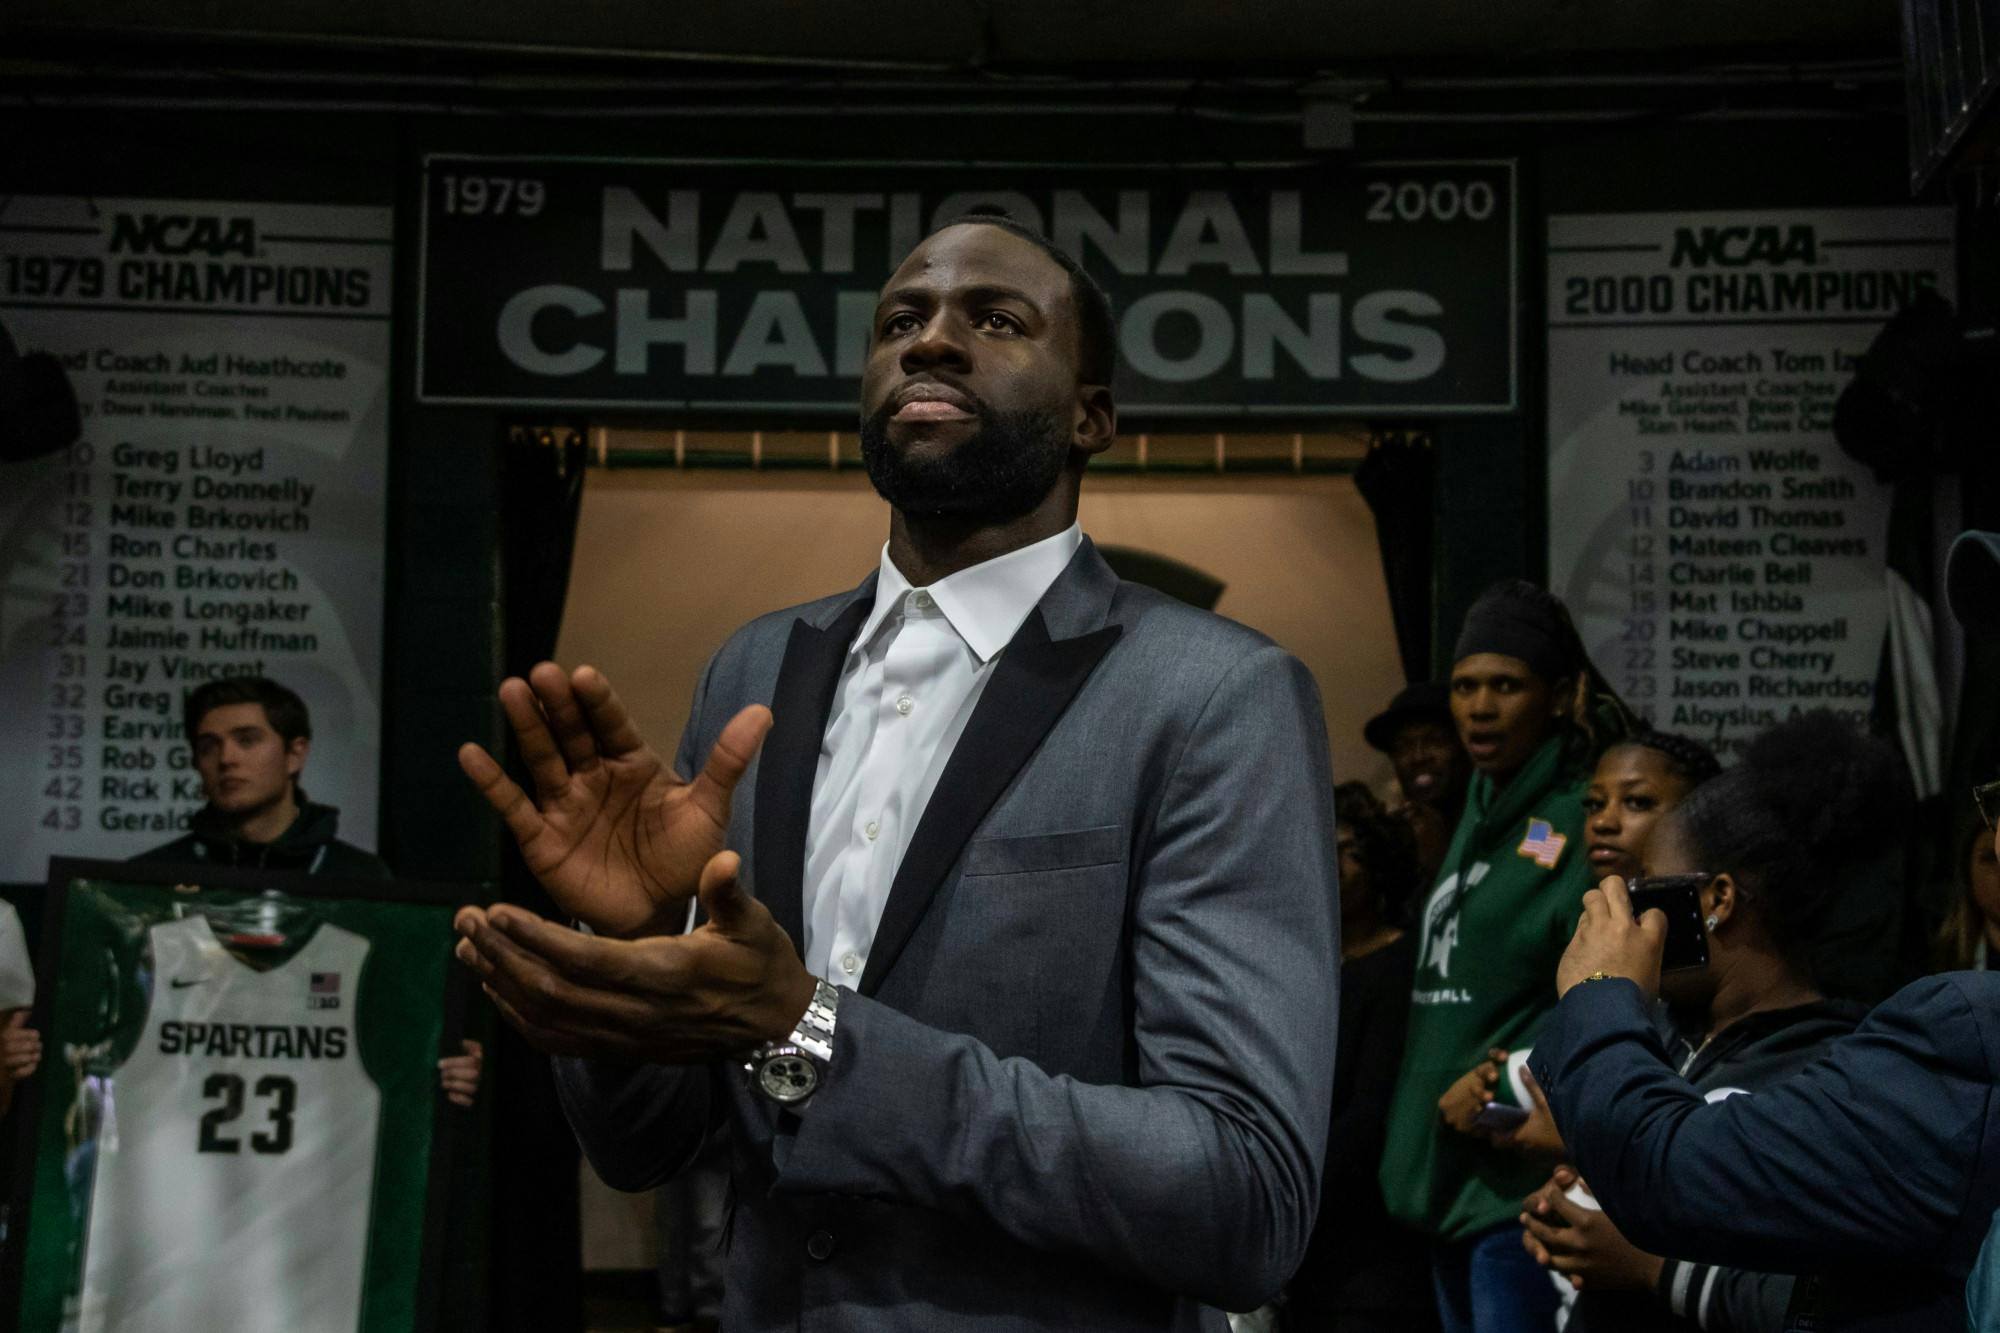 Former MSU and current Golden State Warriors basketball player Draymond Green waits to enter the arena before his number-retirement ceremony at the Breslin Student Events Center on December 3, 2019. The Blue Devils defeated the Spartans, 87-75.